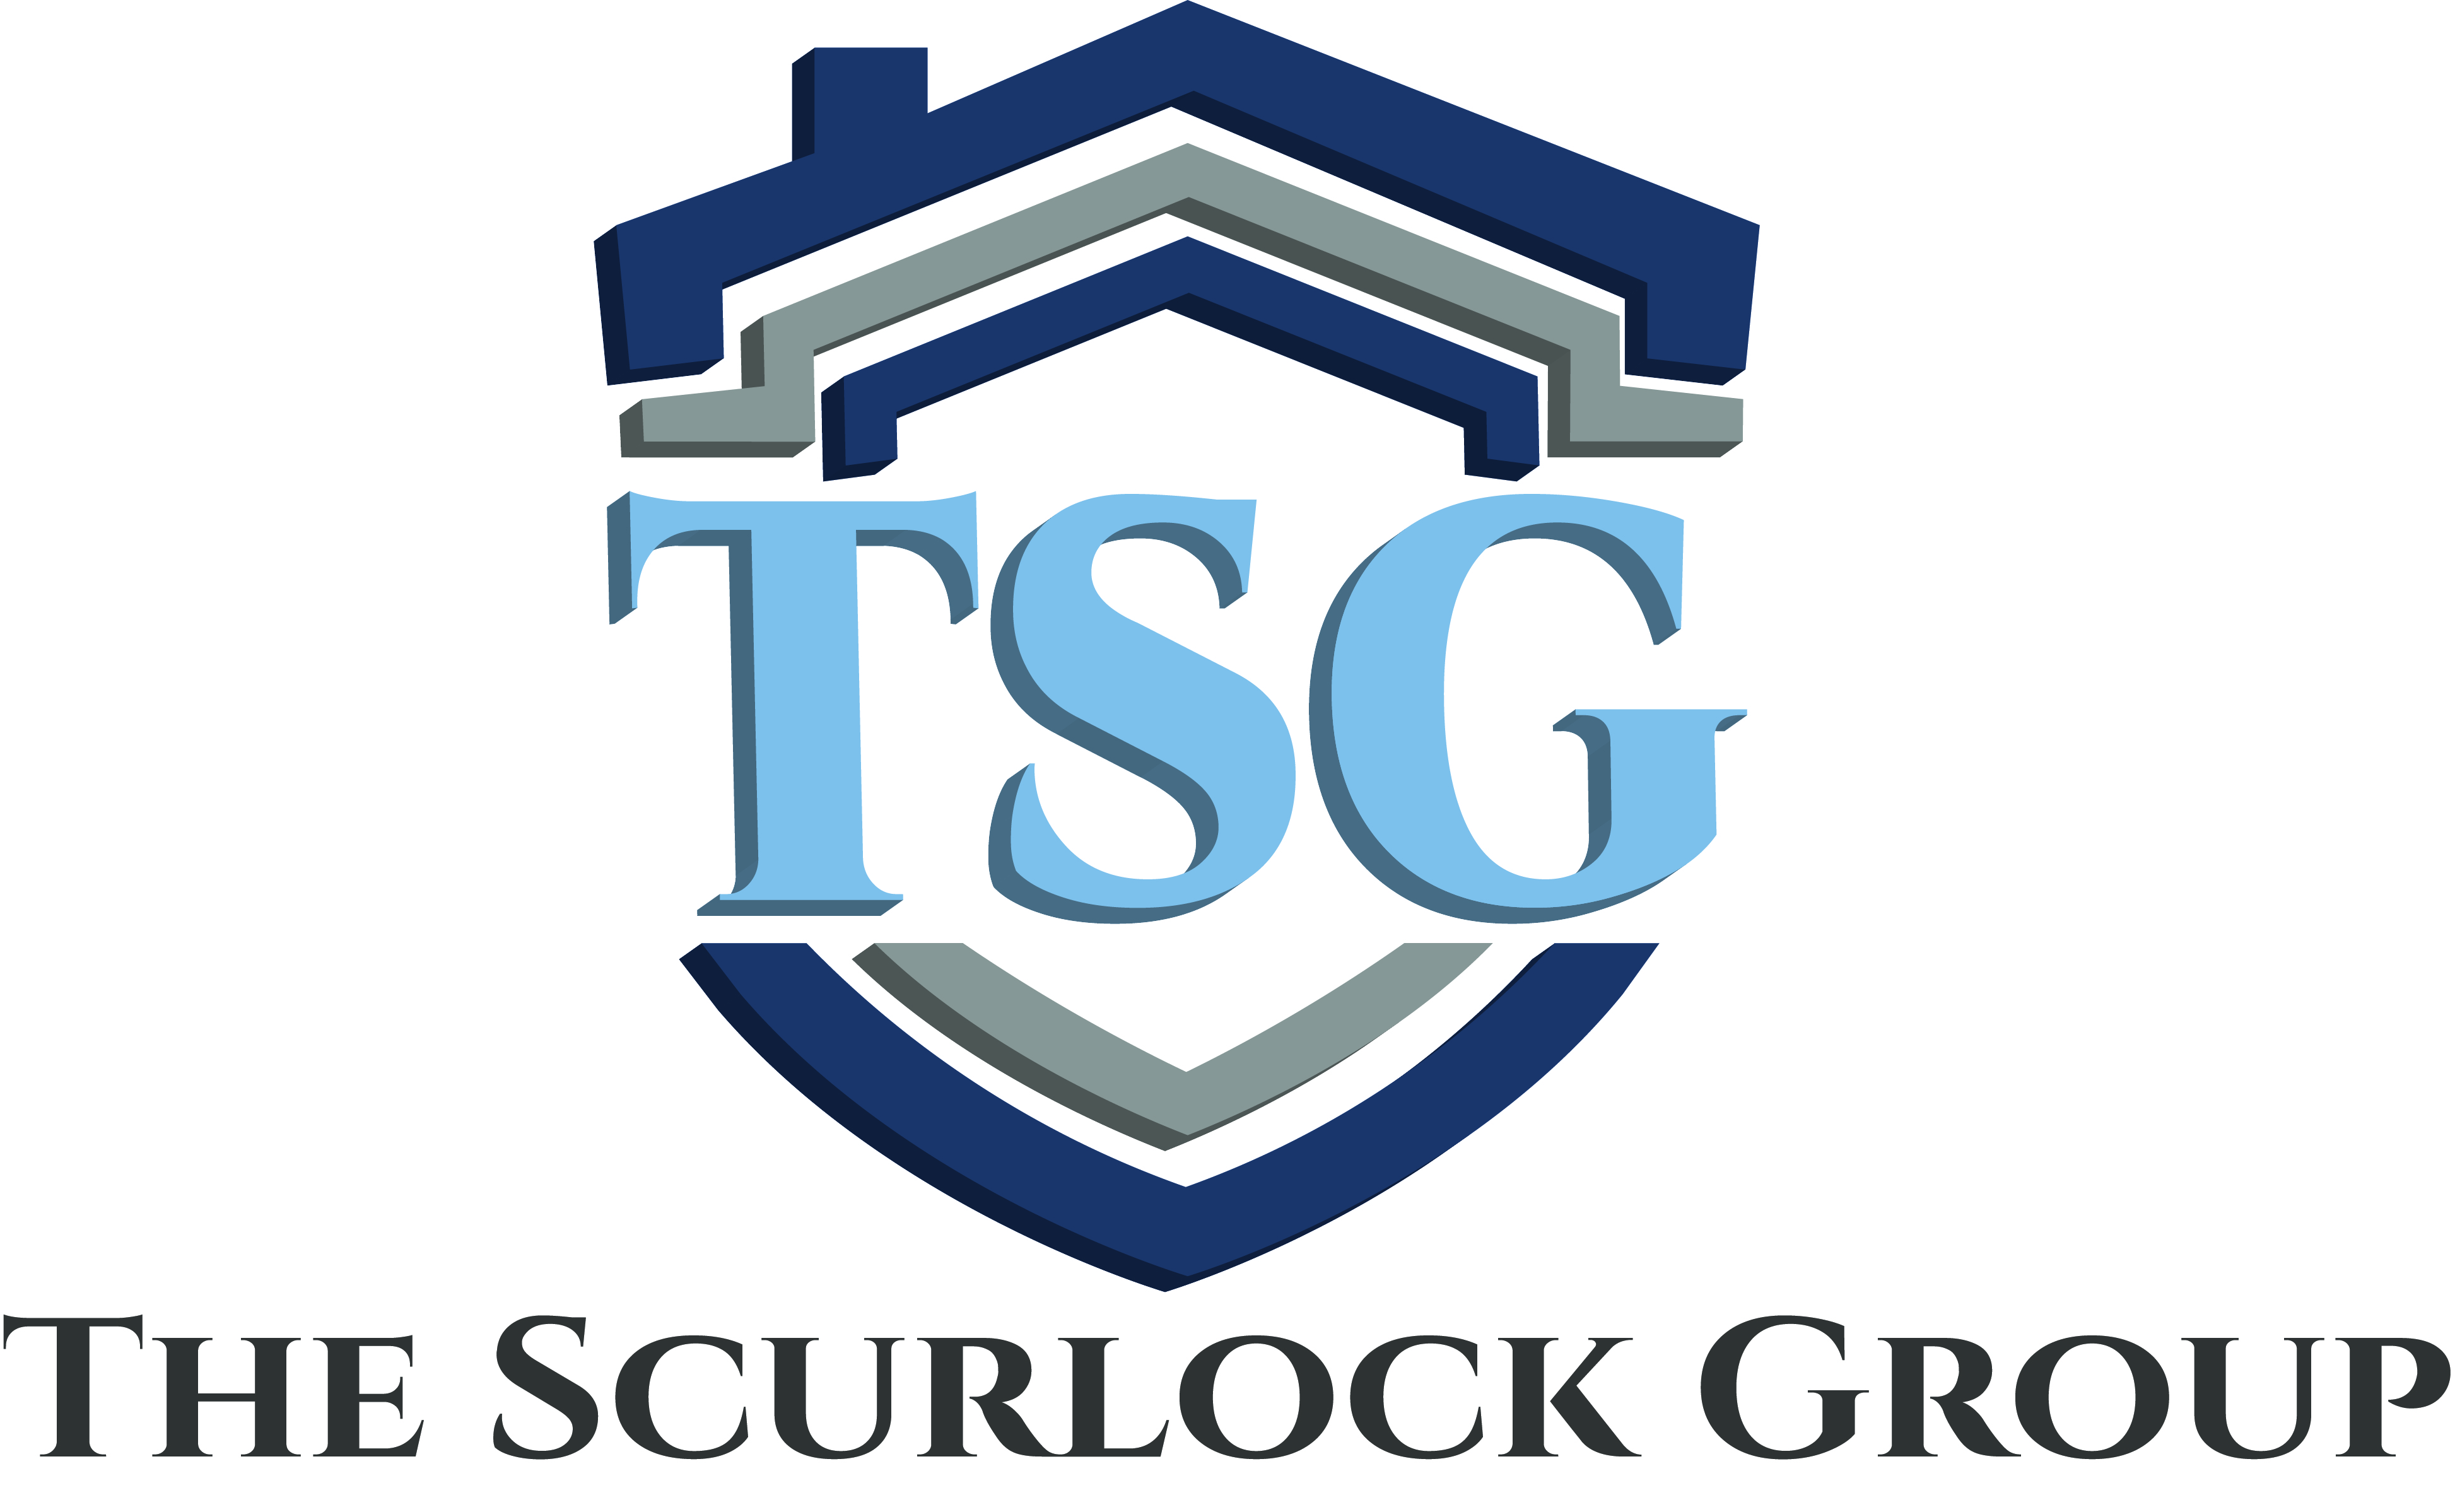 The Scurlock Group